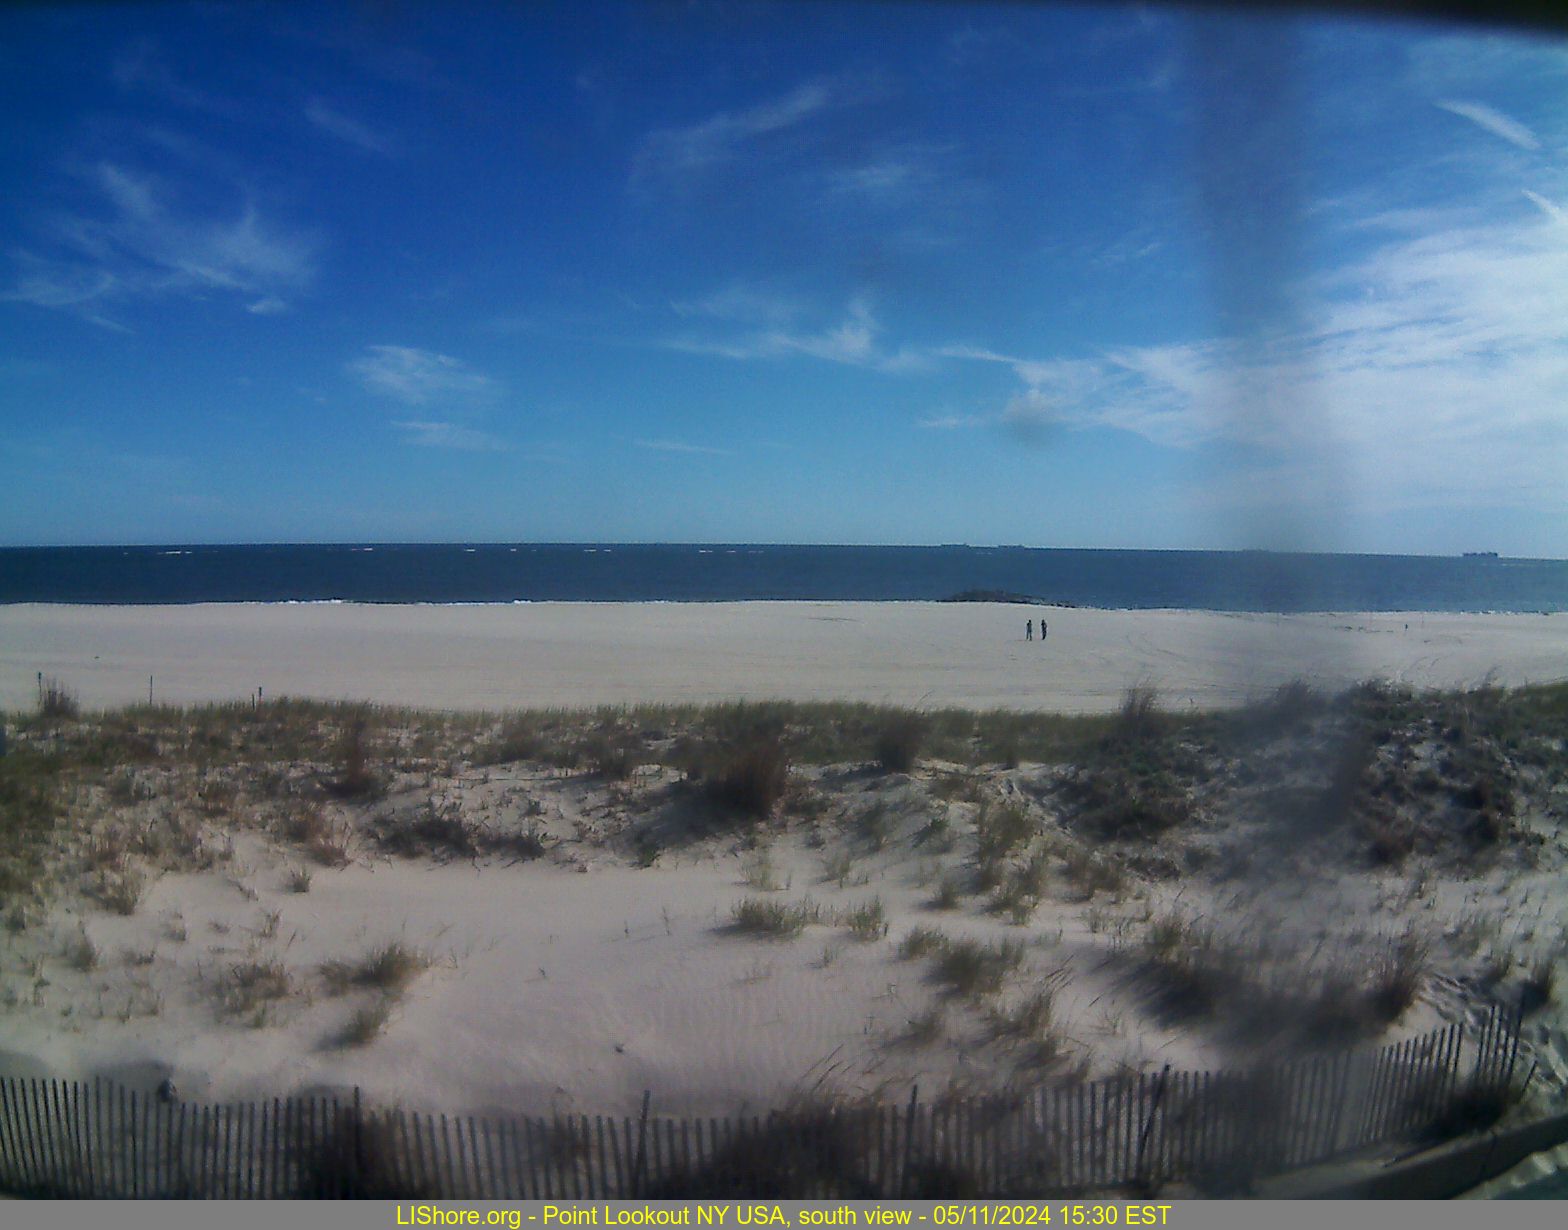 Webcam thumbnail of Point Lookout Beach - south view